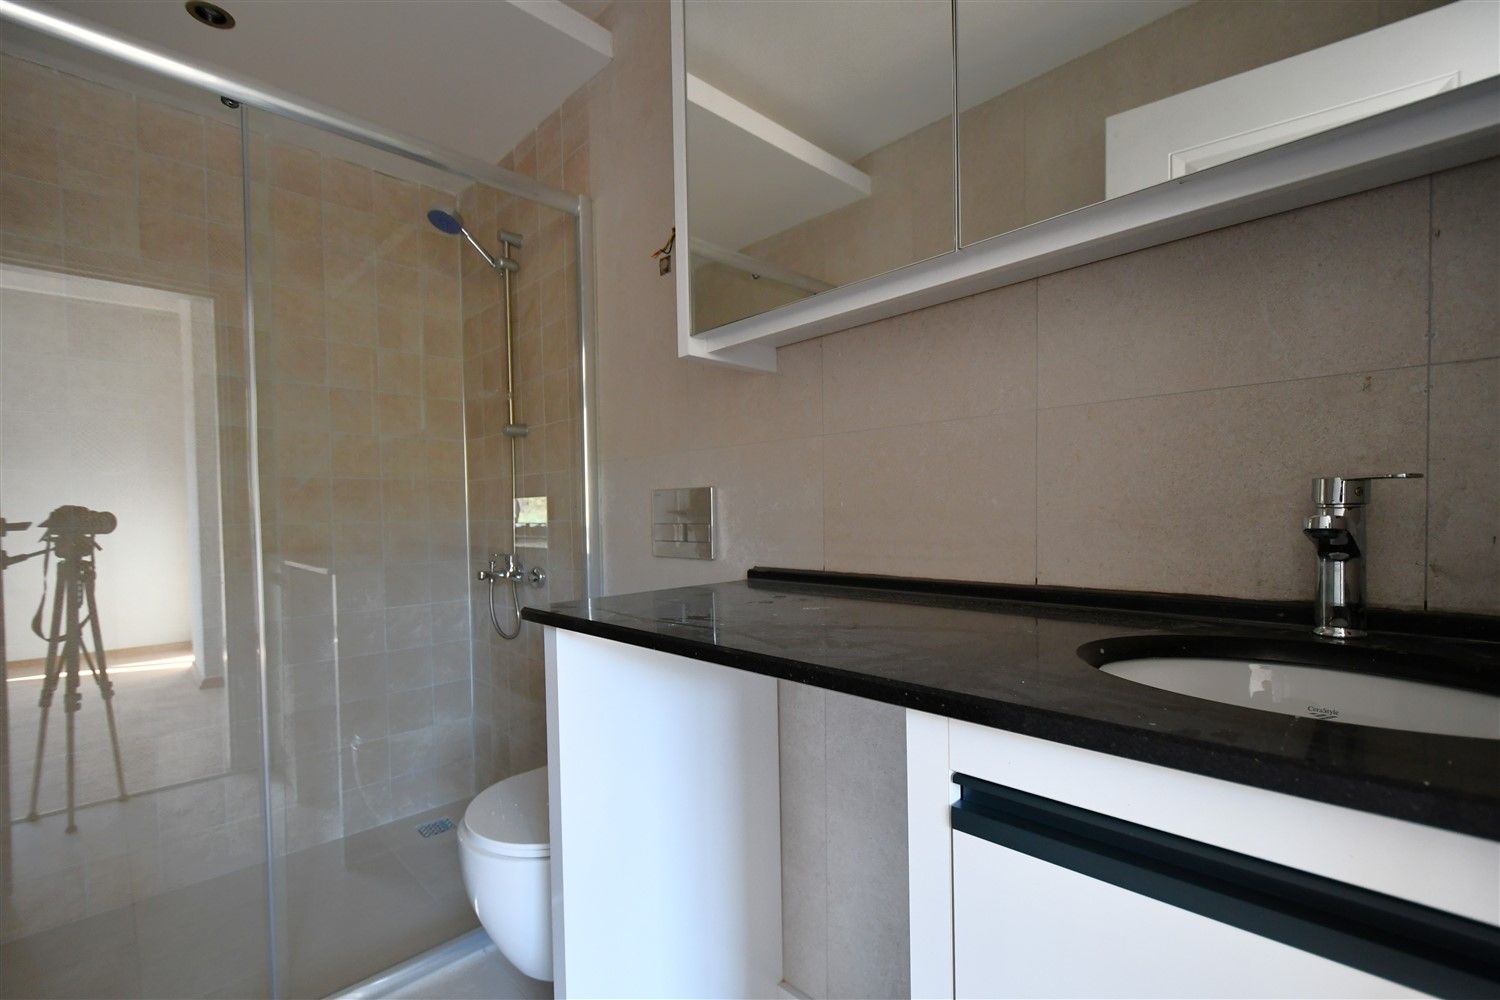 New 3+1 apartment with separate kitchen - Oba district, Alanya